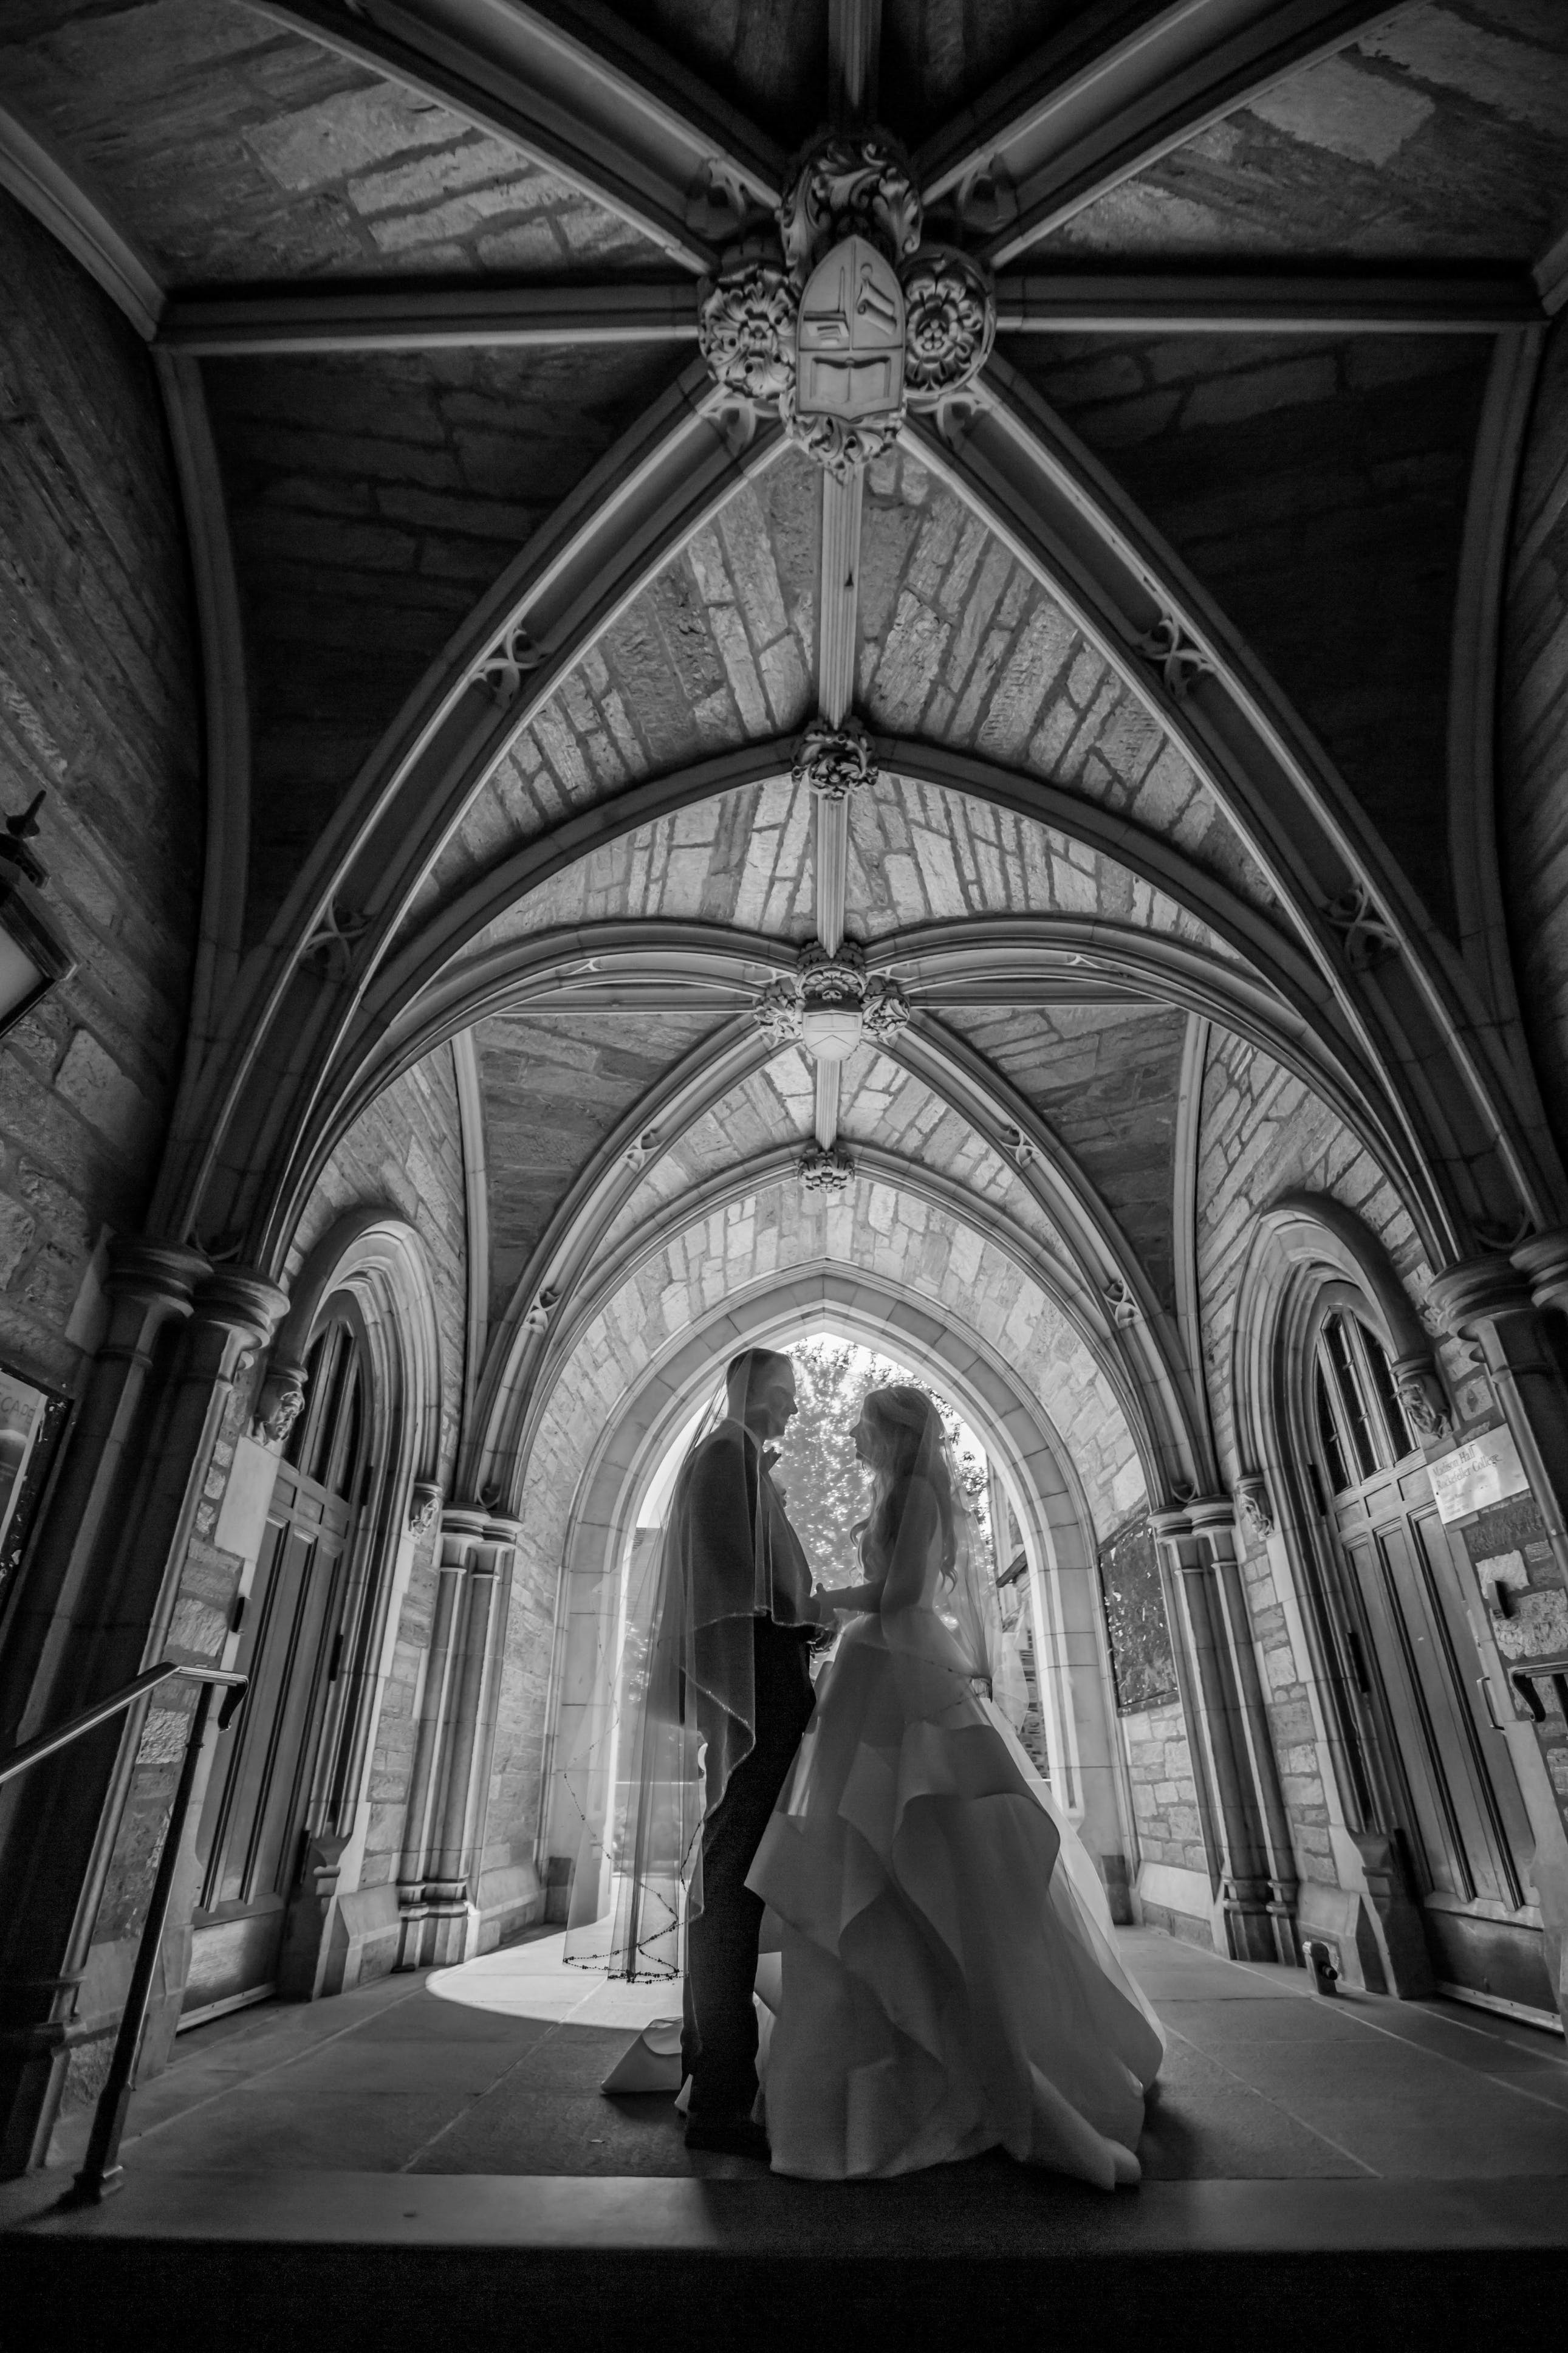 A bride and groom standing at their wedding venue | Source: Pexels